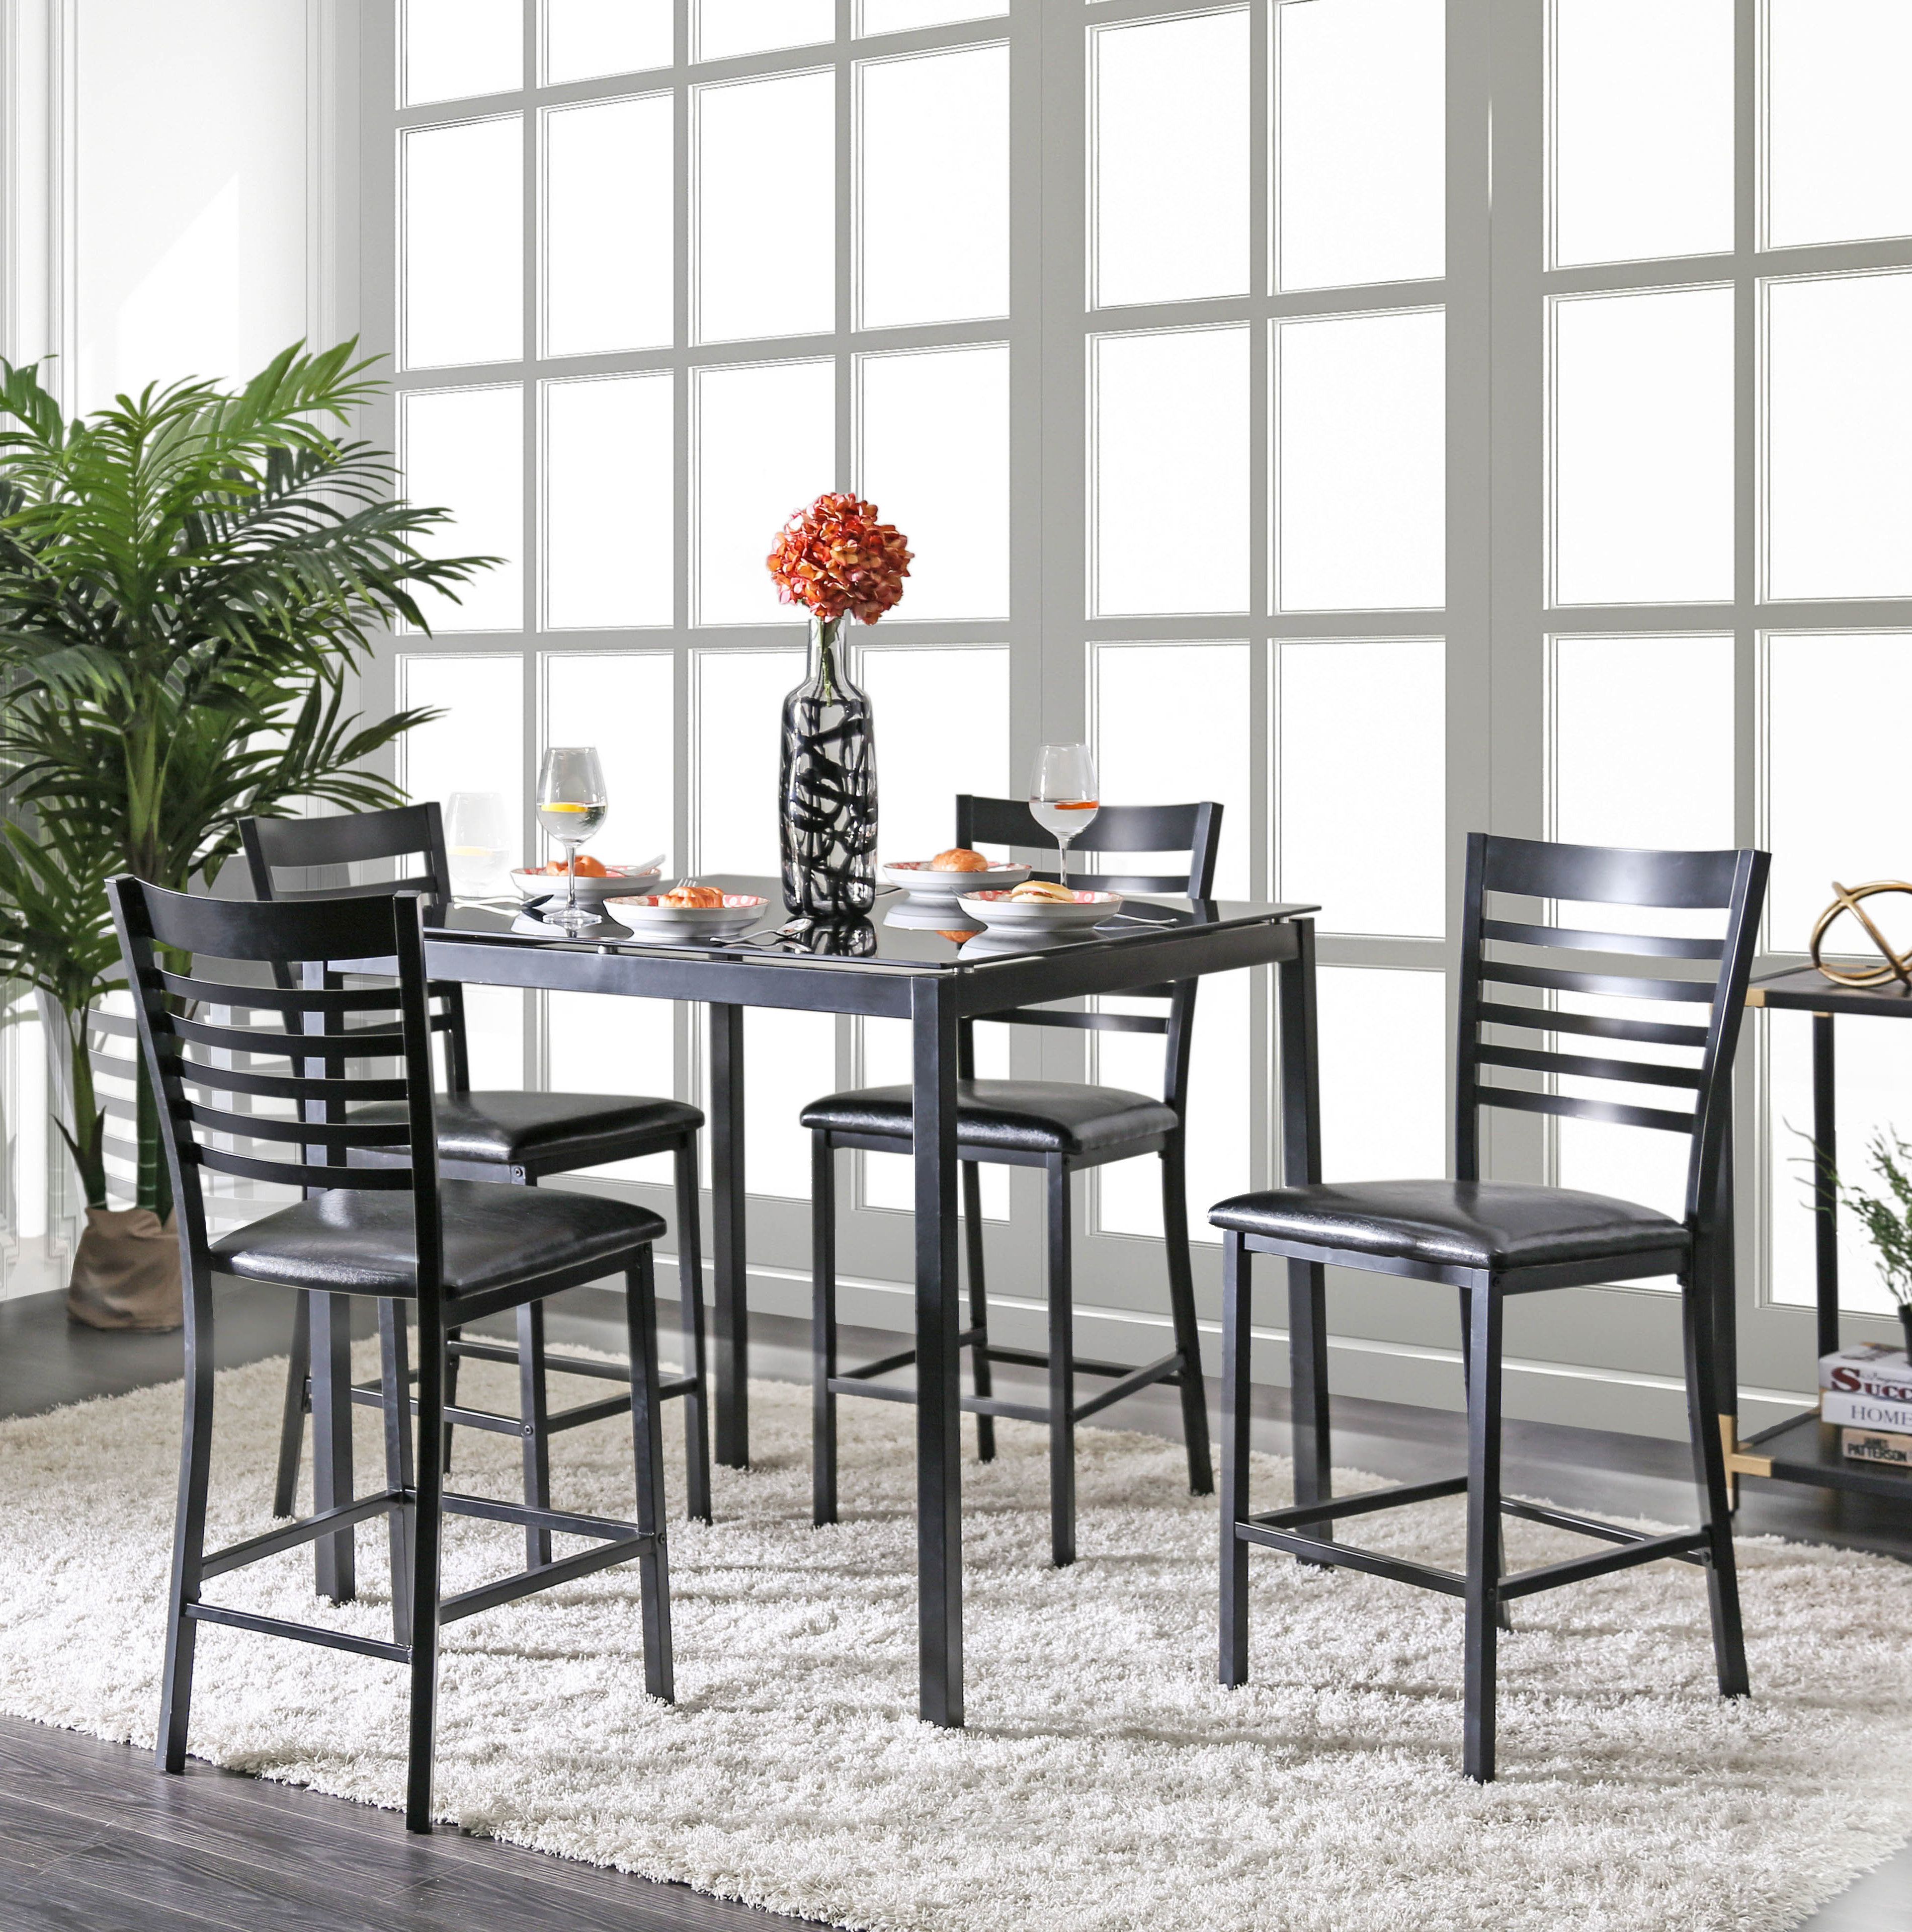 Bhamidipati Pub 5 Piece Dining Set Throughout Most Popular Taulbee 5 Piece Dining Sets (View 13 of 20)